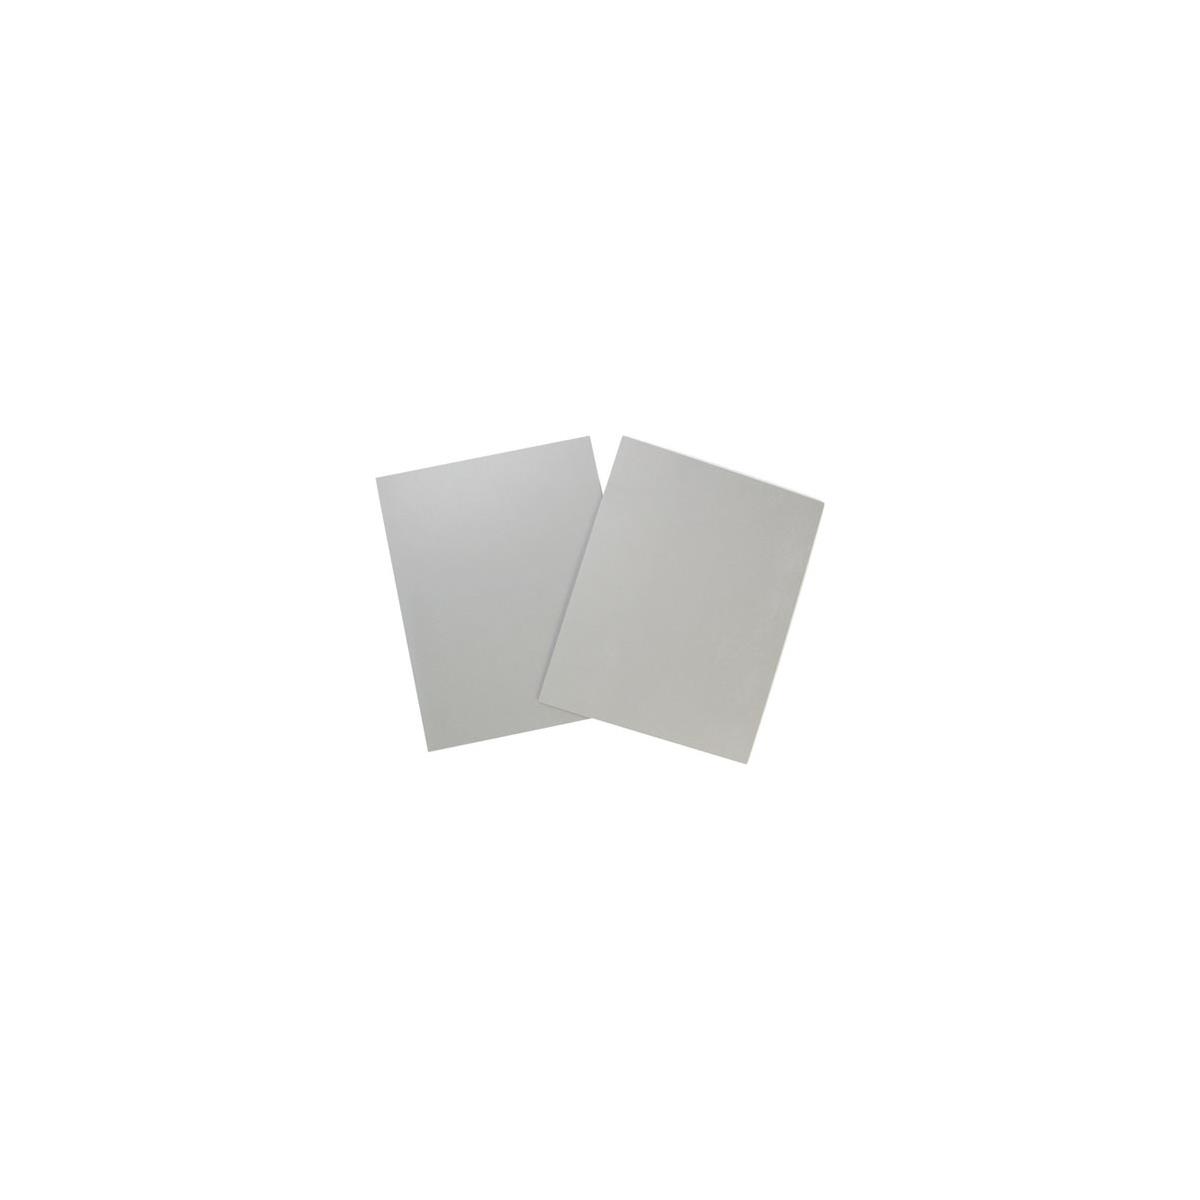 DL-0510 Gray Card 2 Pack